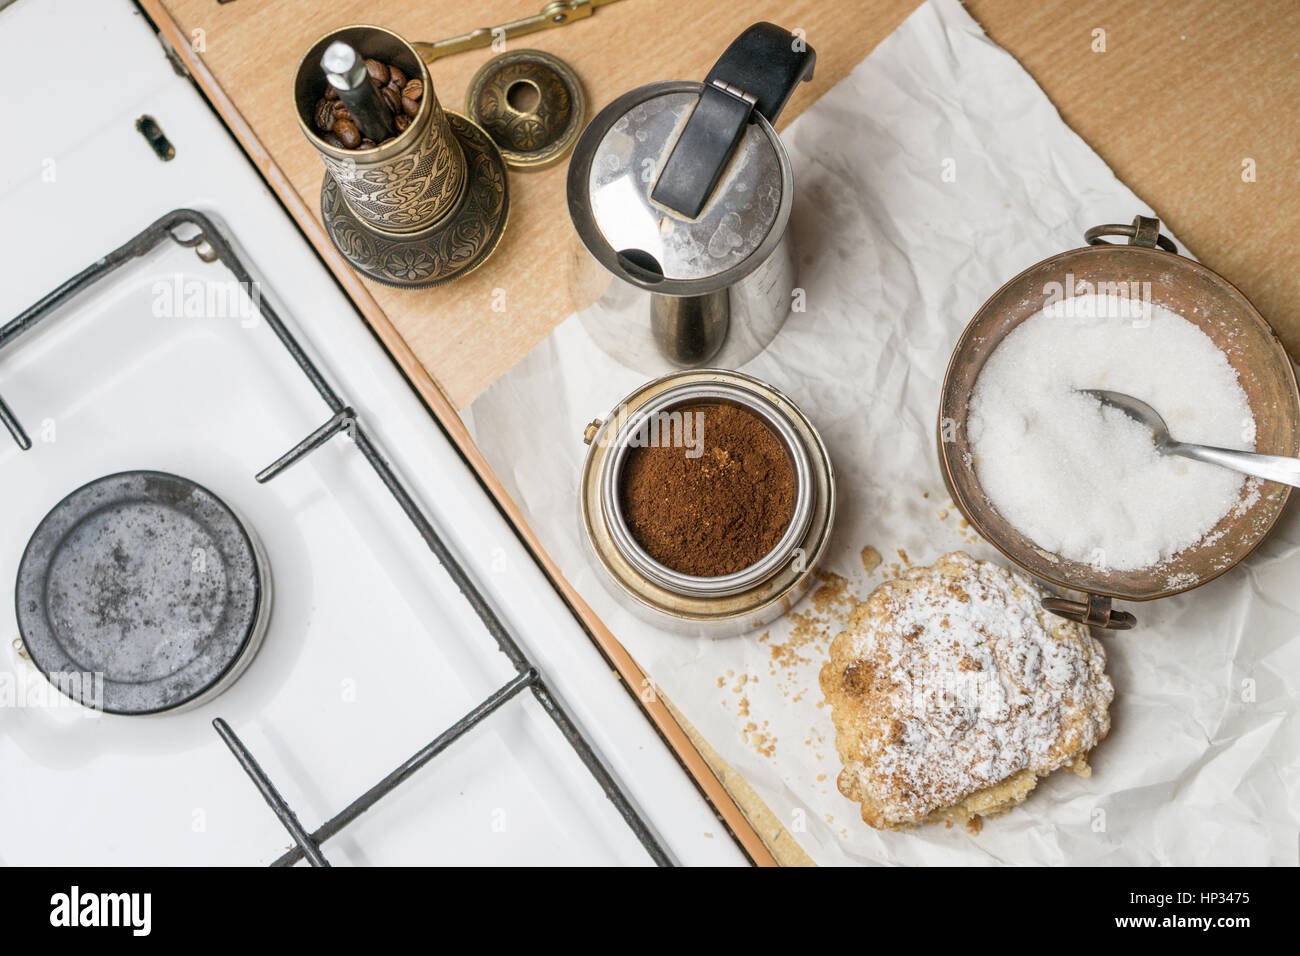 Kitchen still life with coffee maker, apple pie and gas cooker Stock Photo